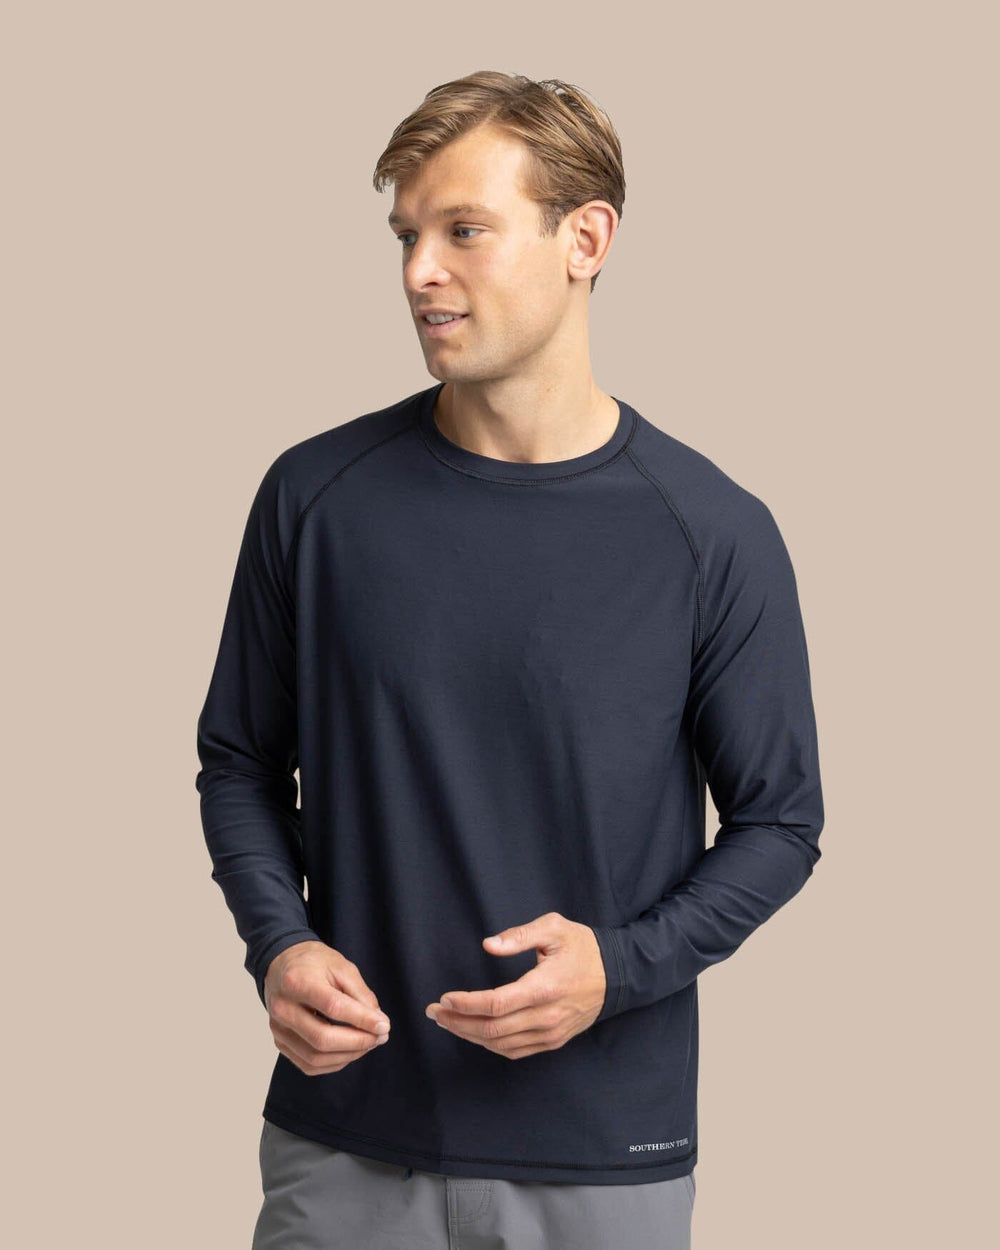 The front view of the Southern Tide brrr-illiant Performance Long Sleeve T-Shirt by Southern Tide - Caviar Black